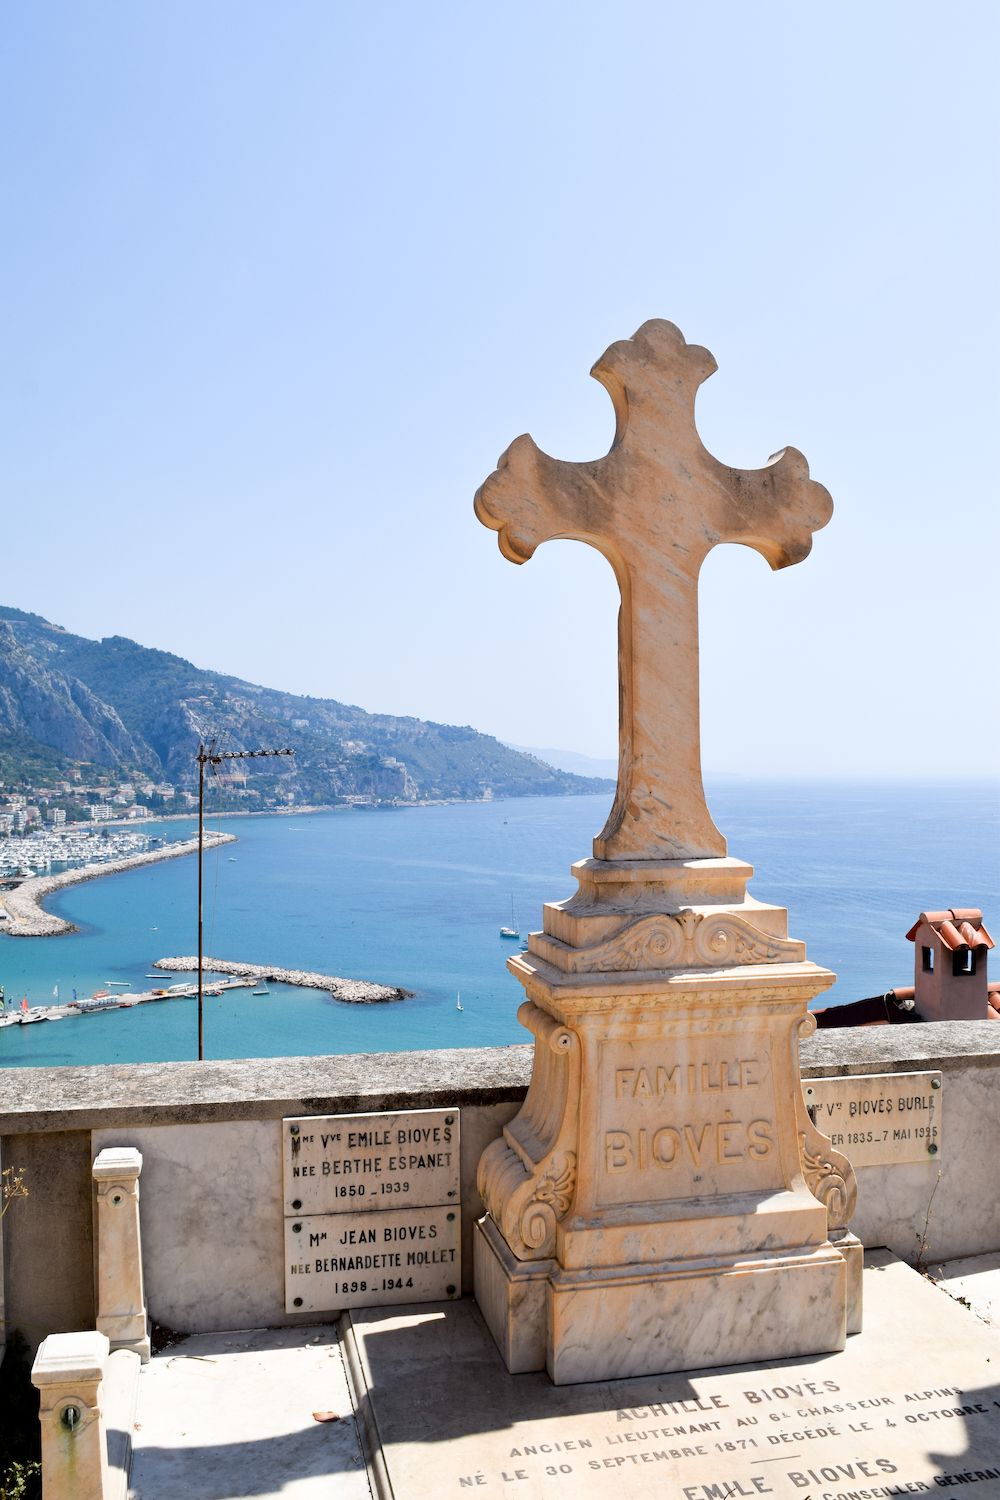 The Best, Most Breathtaking View in Menton, France